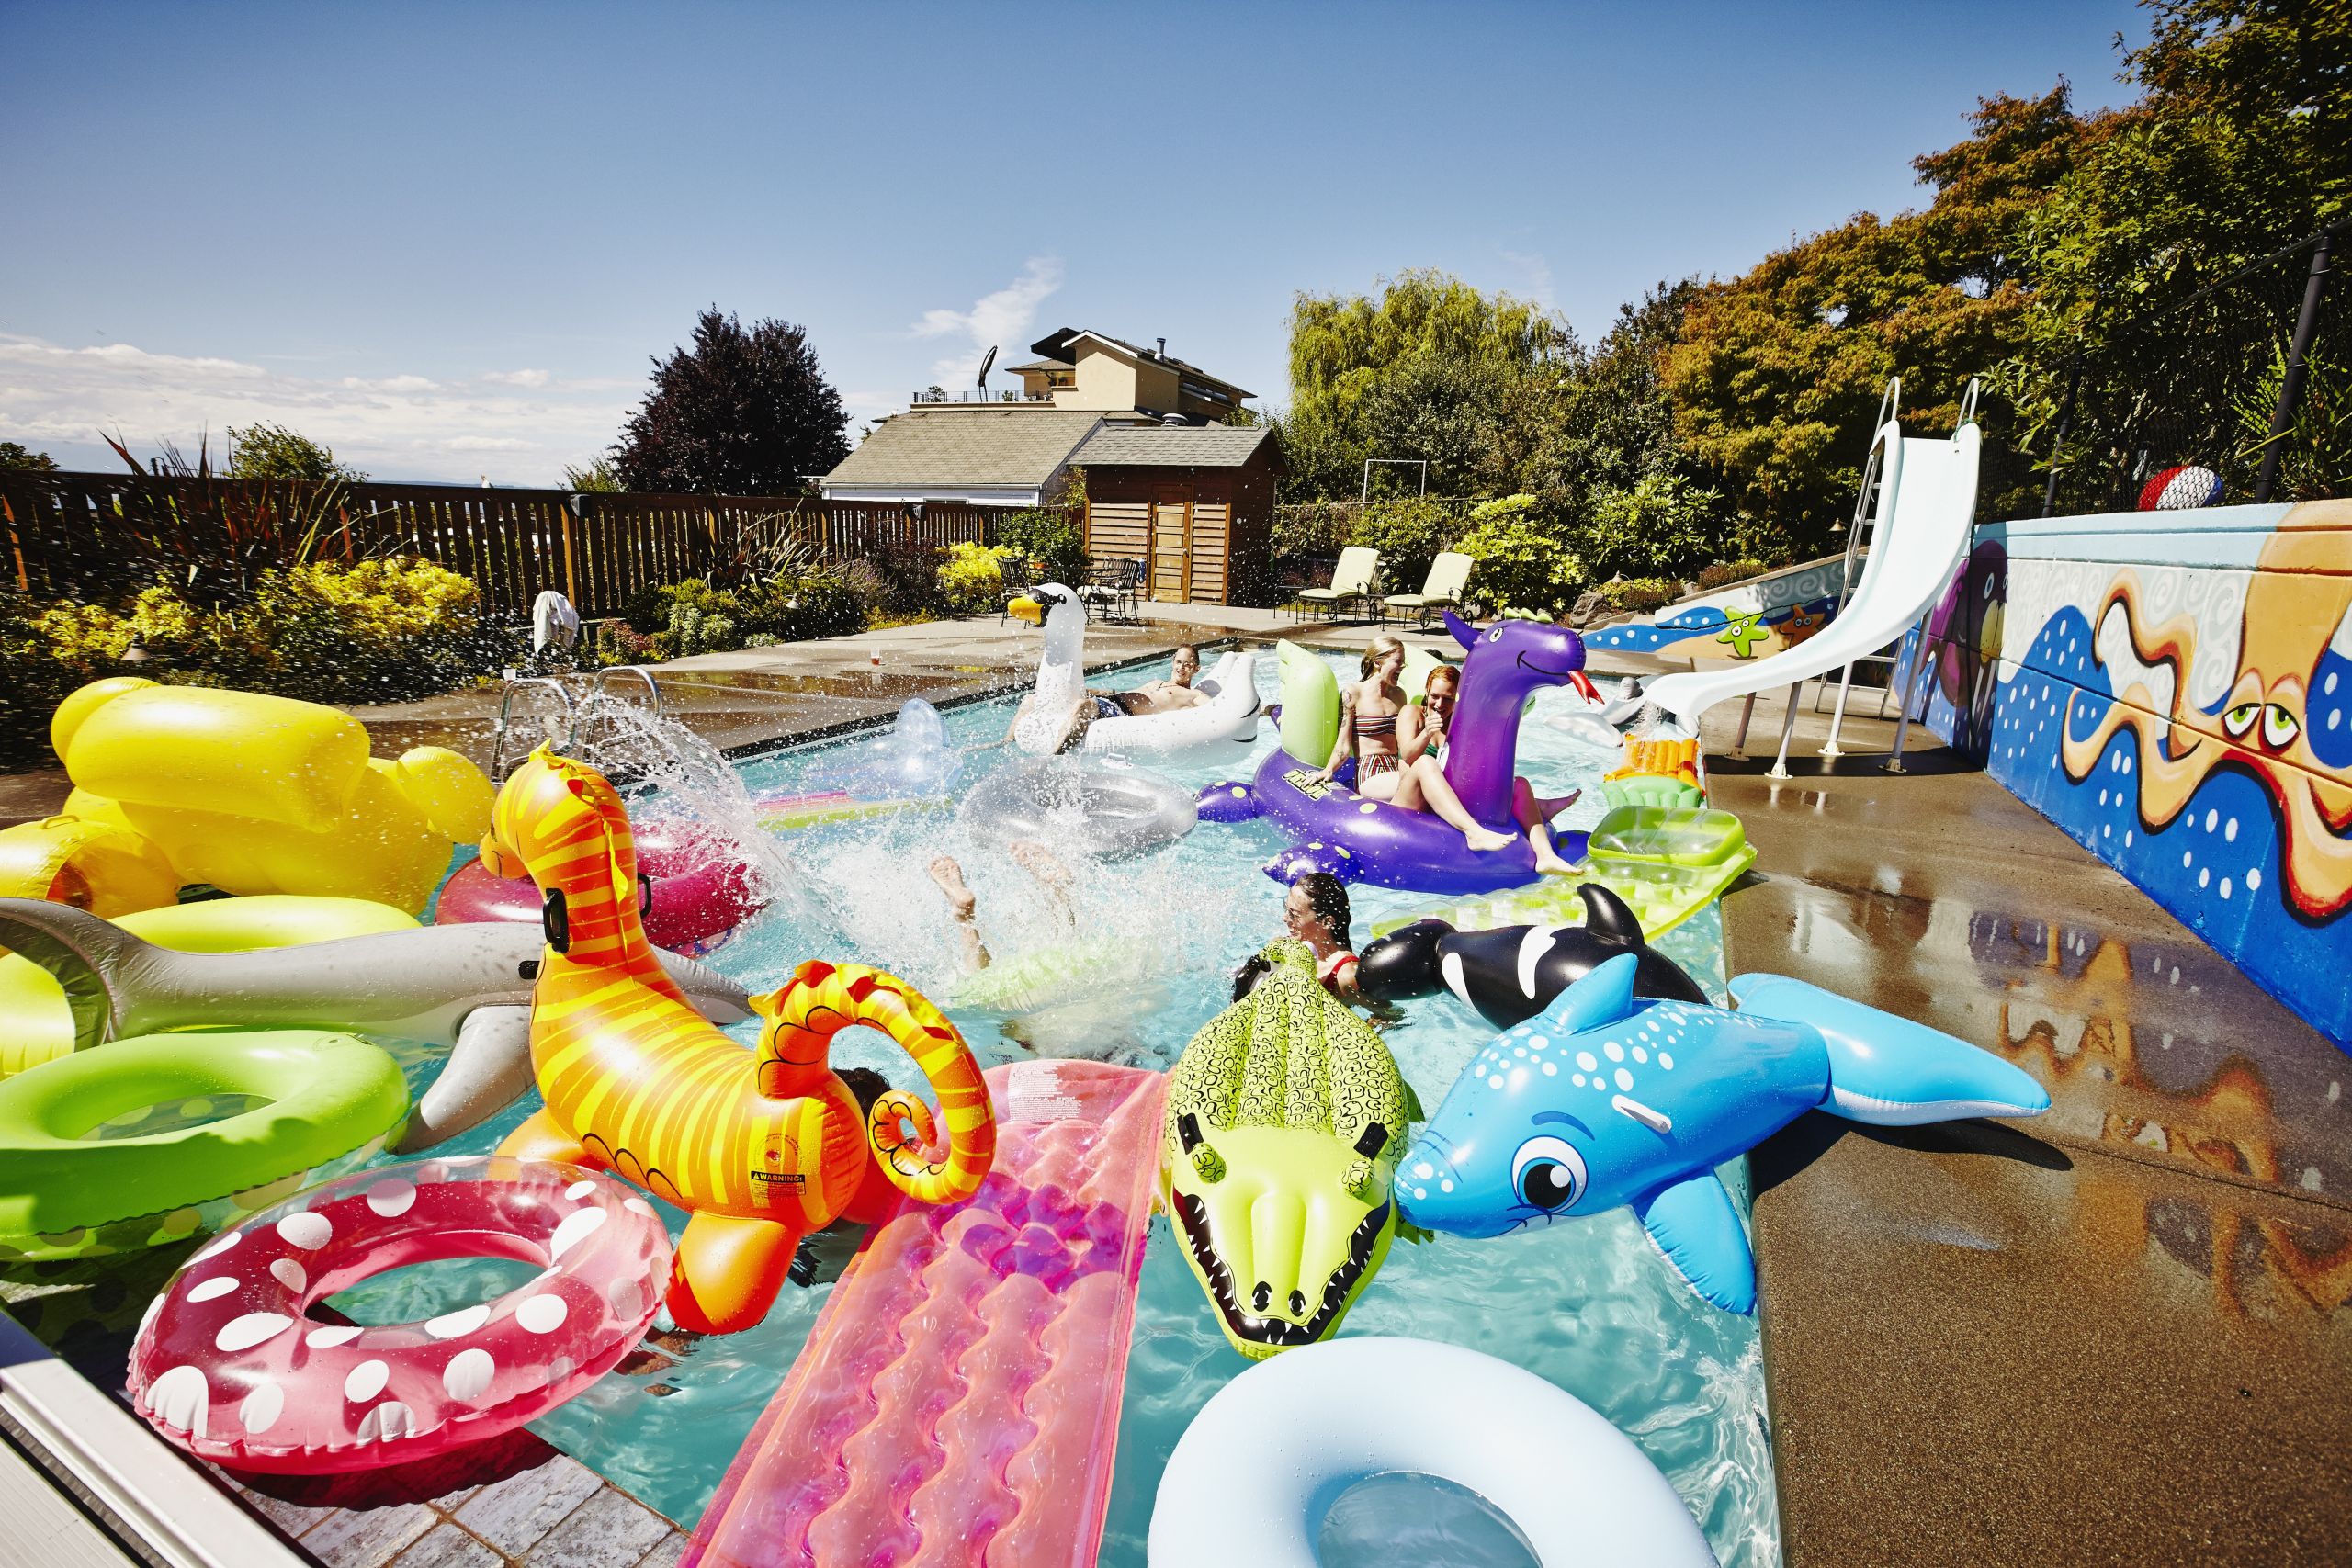 Rained Out Pool Party Ideas
 How to host a pool party